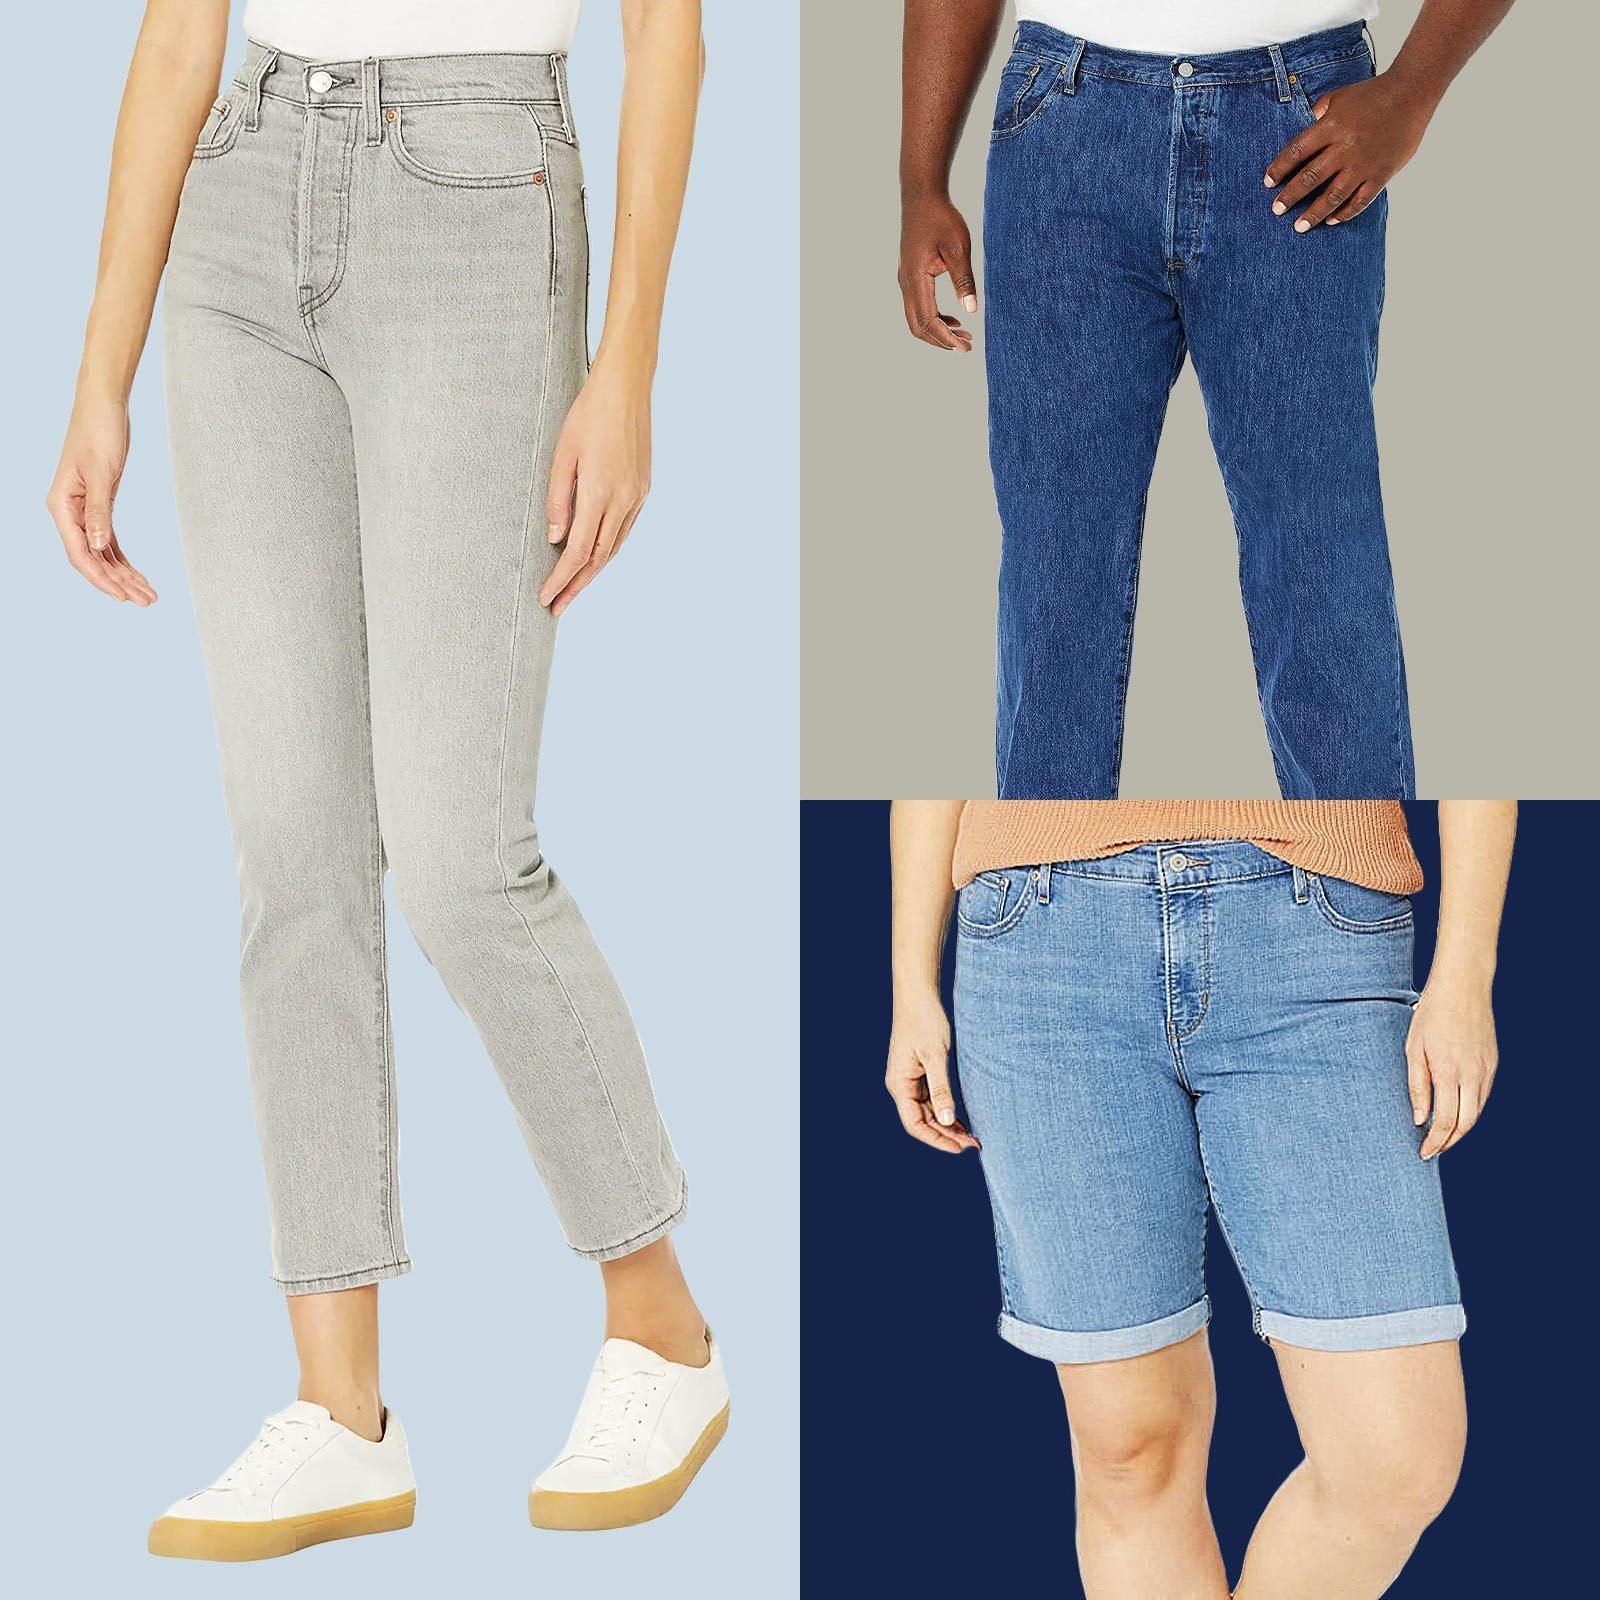 High rise mom jeans • Compare & find best price now »